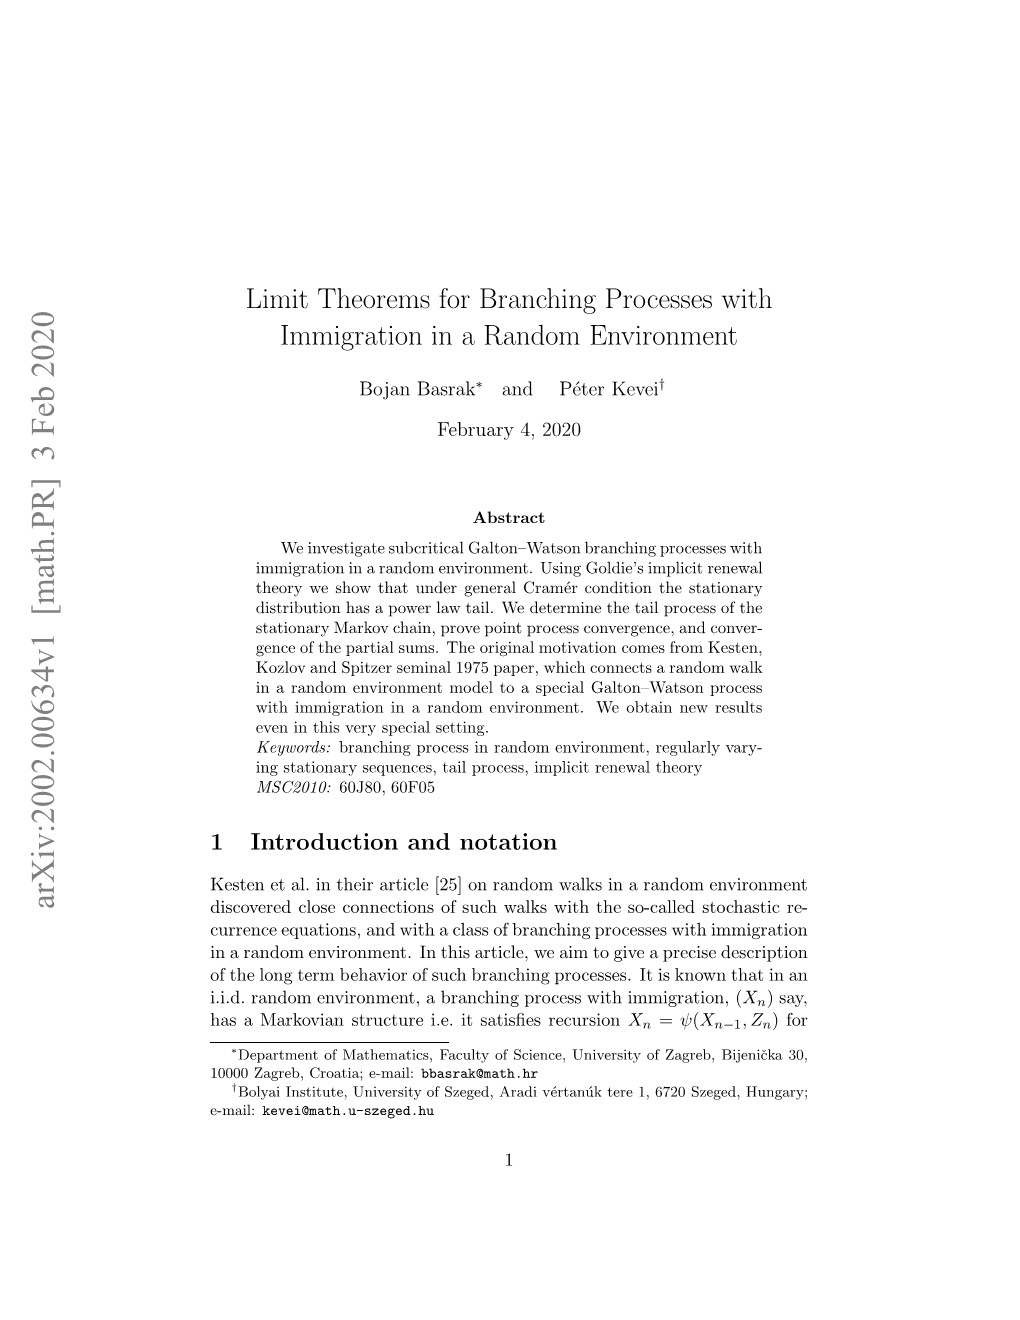 Limit Theorems for Branching Processes with Immigration in A